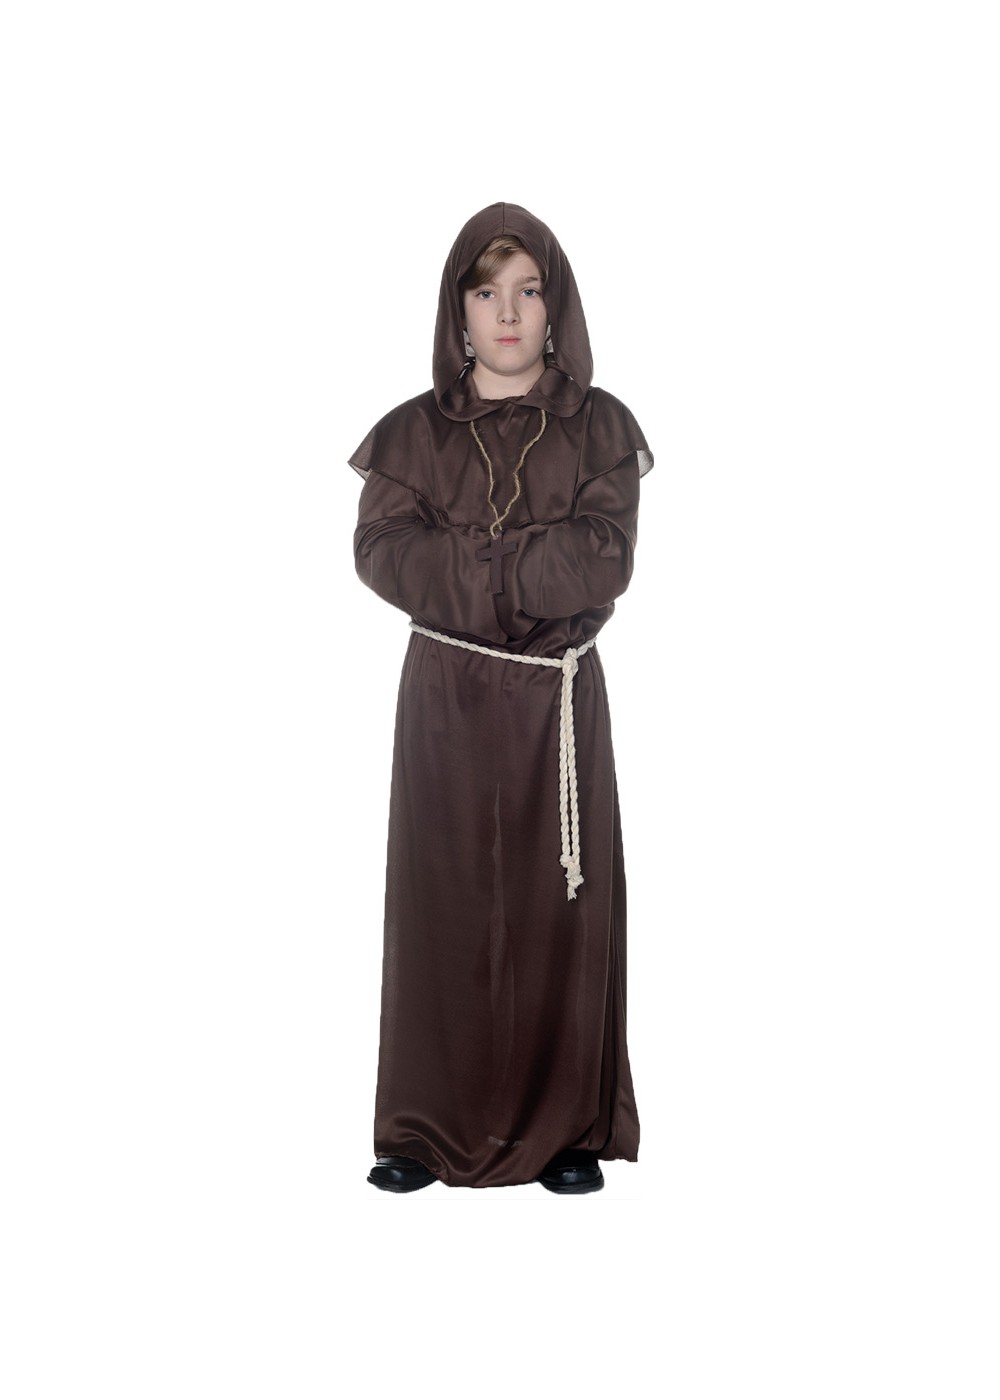 CHILDREN MEDIEVAL MONK BROWN COSTUME HALLOWEEN PARTY OUTFIT WEEK DAY FANCY DRESS 